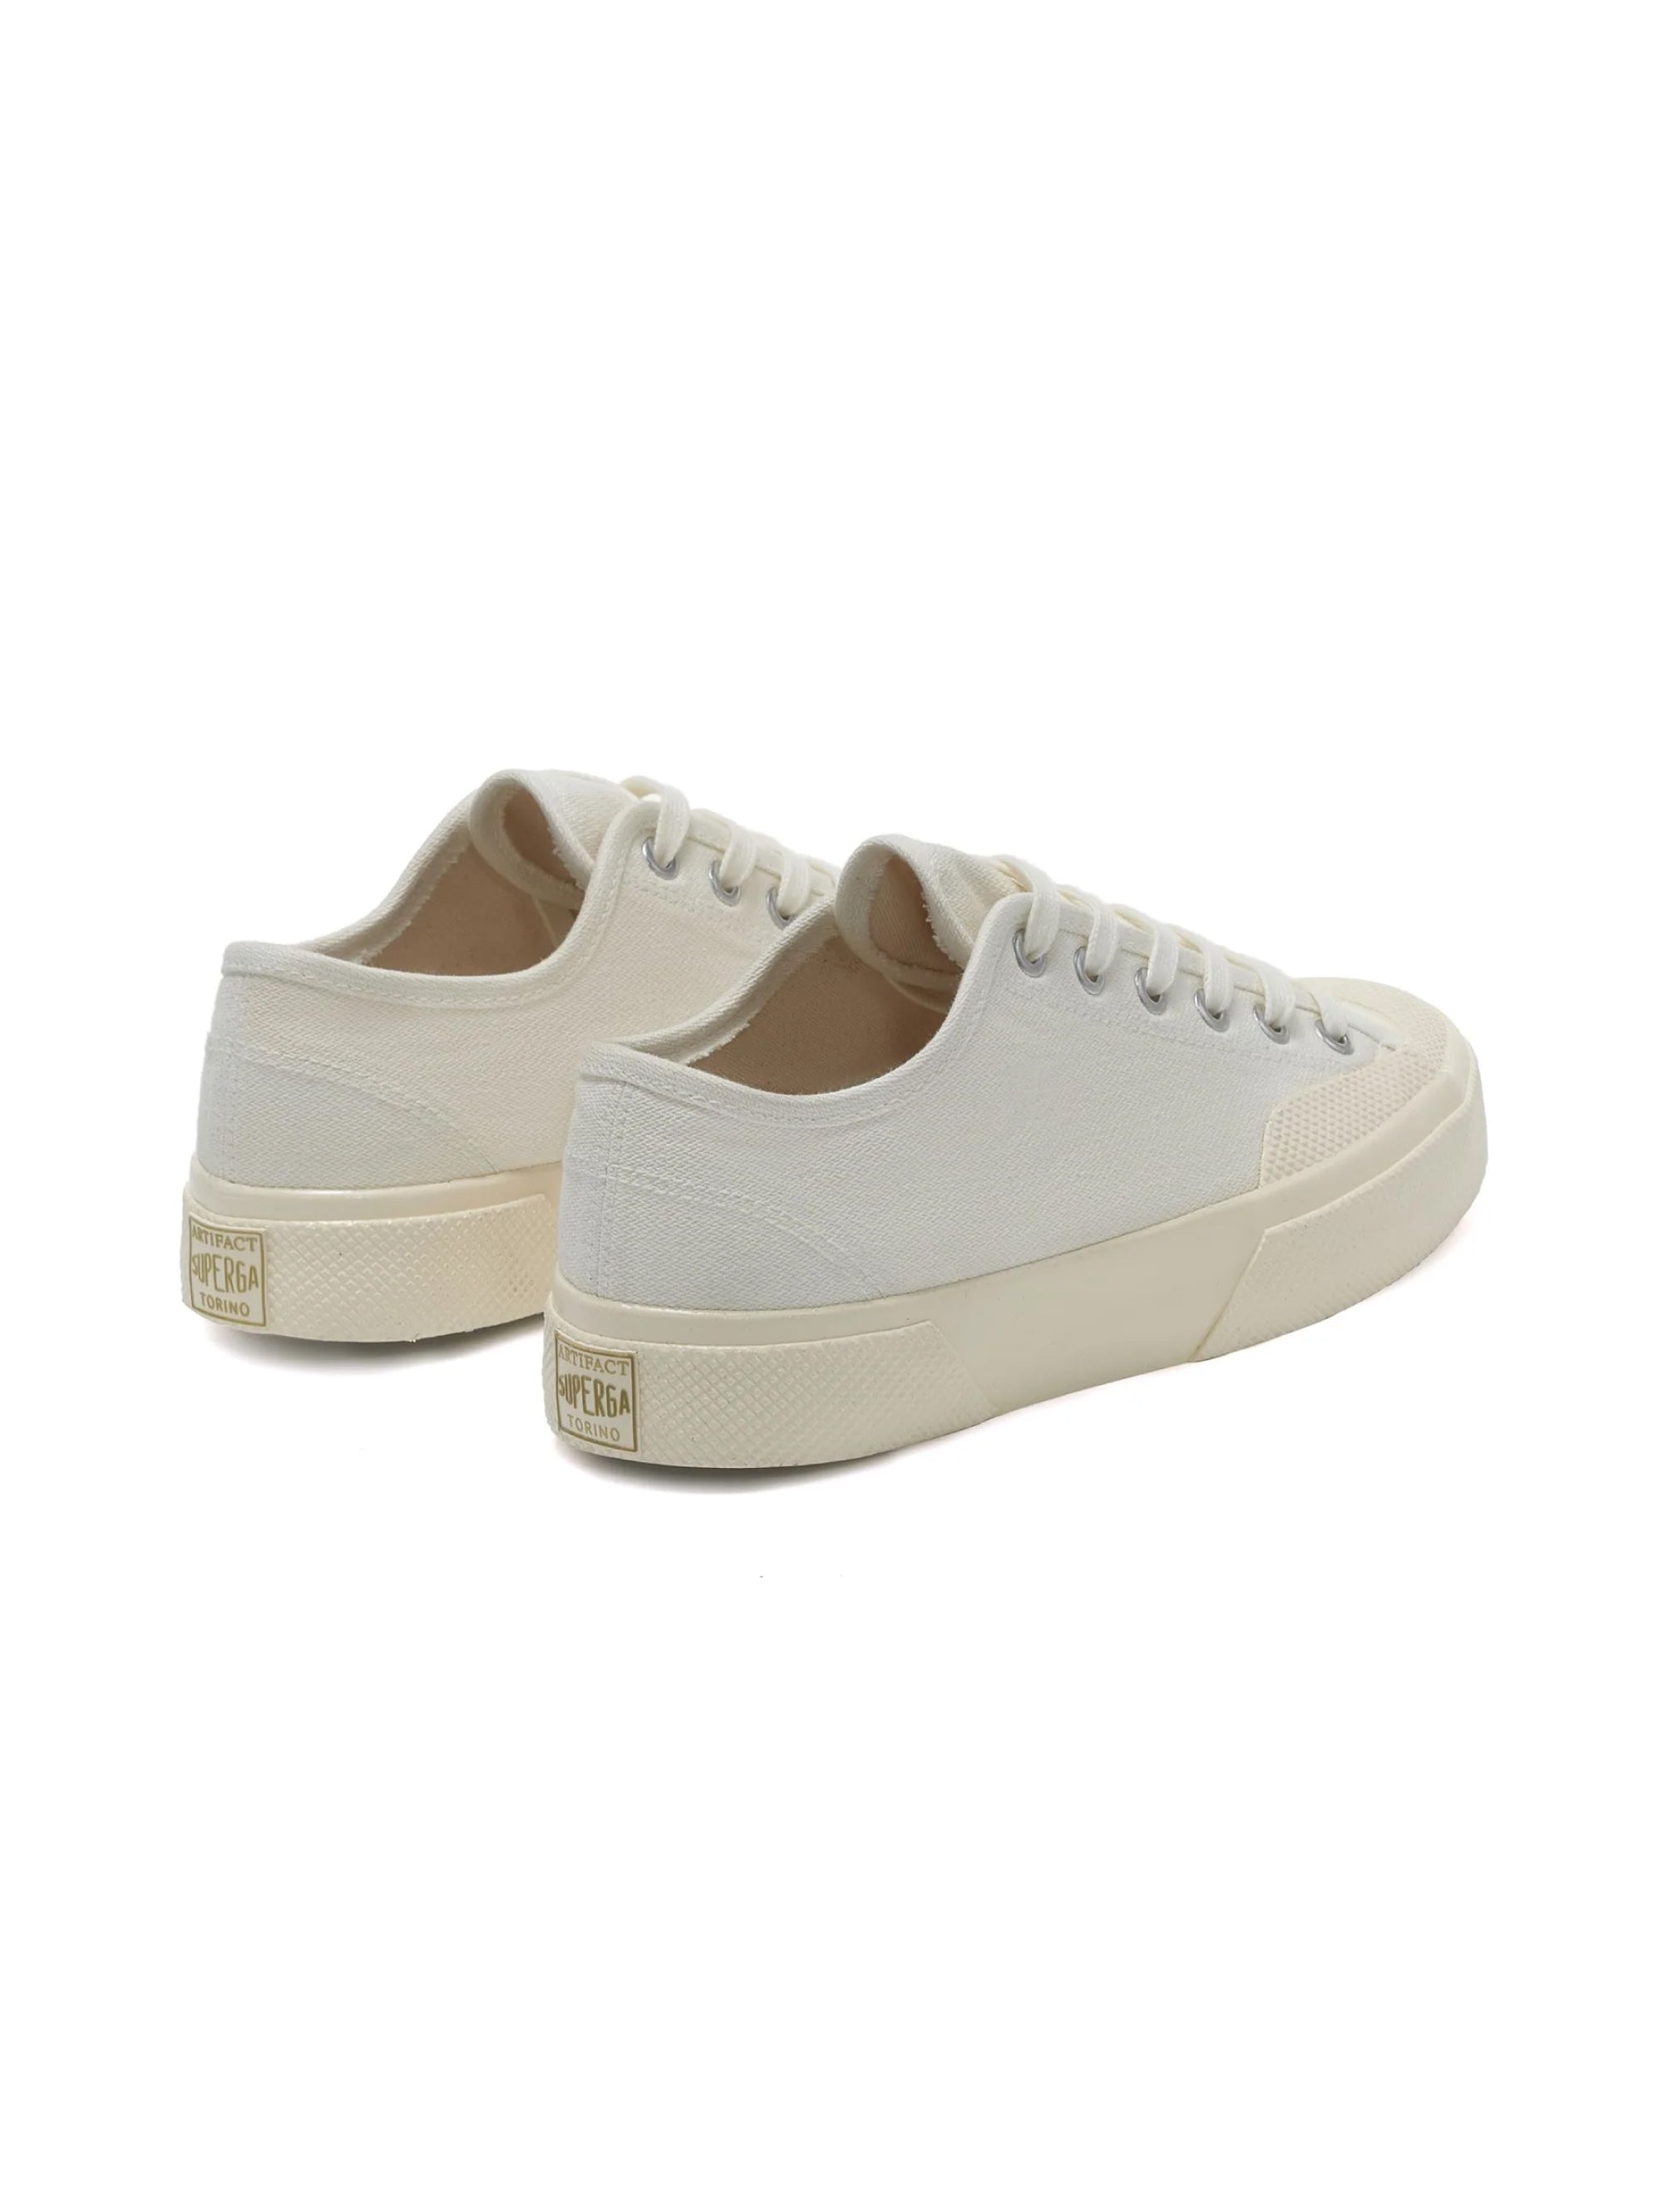 Artifact Low Sneakers in White Twill